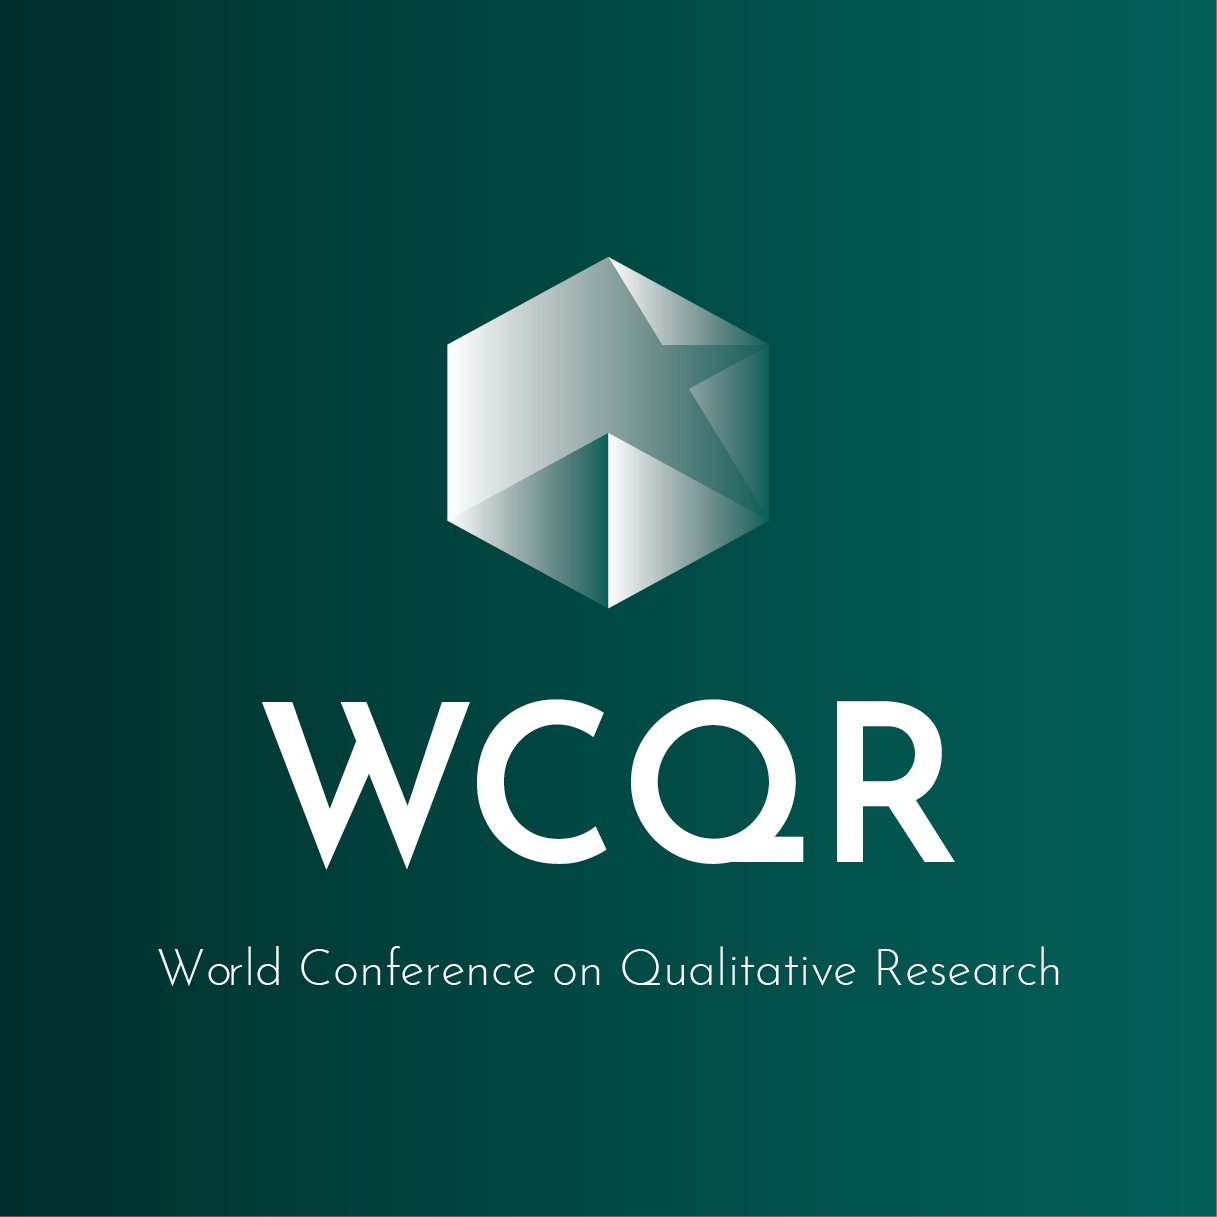 The World Conference on Qualitative Research (WCQR)